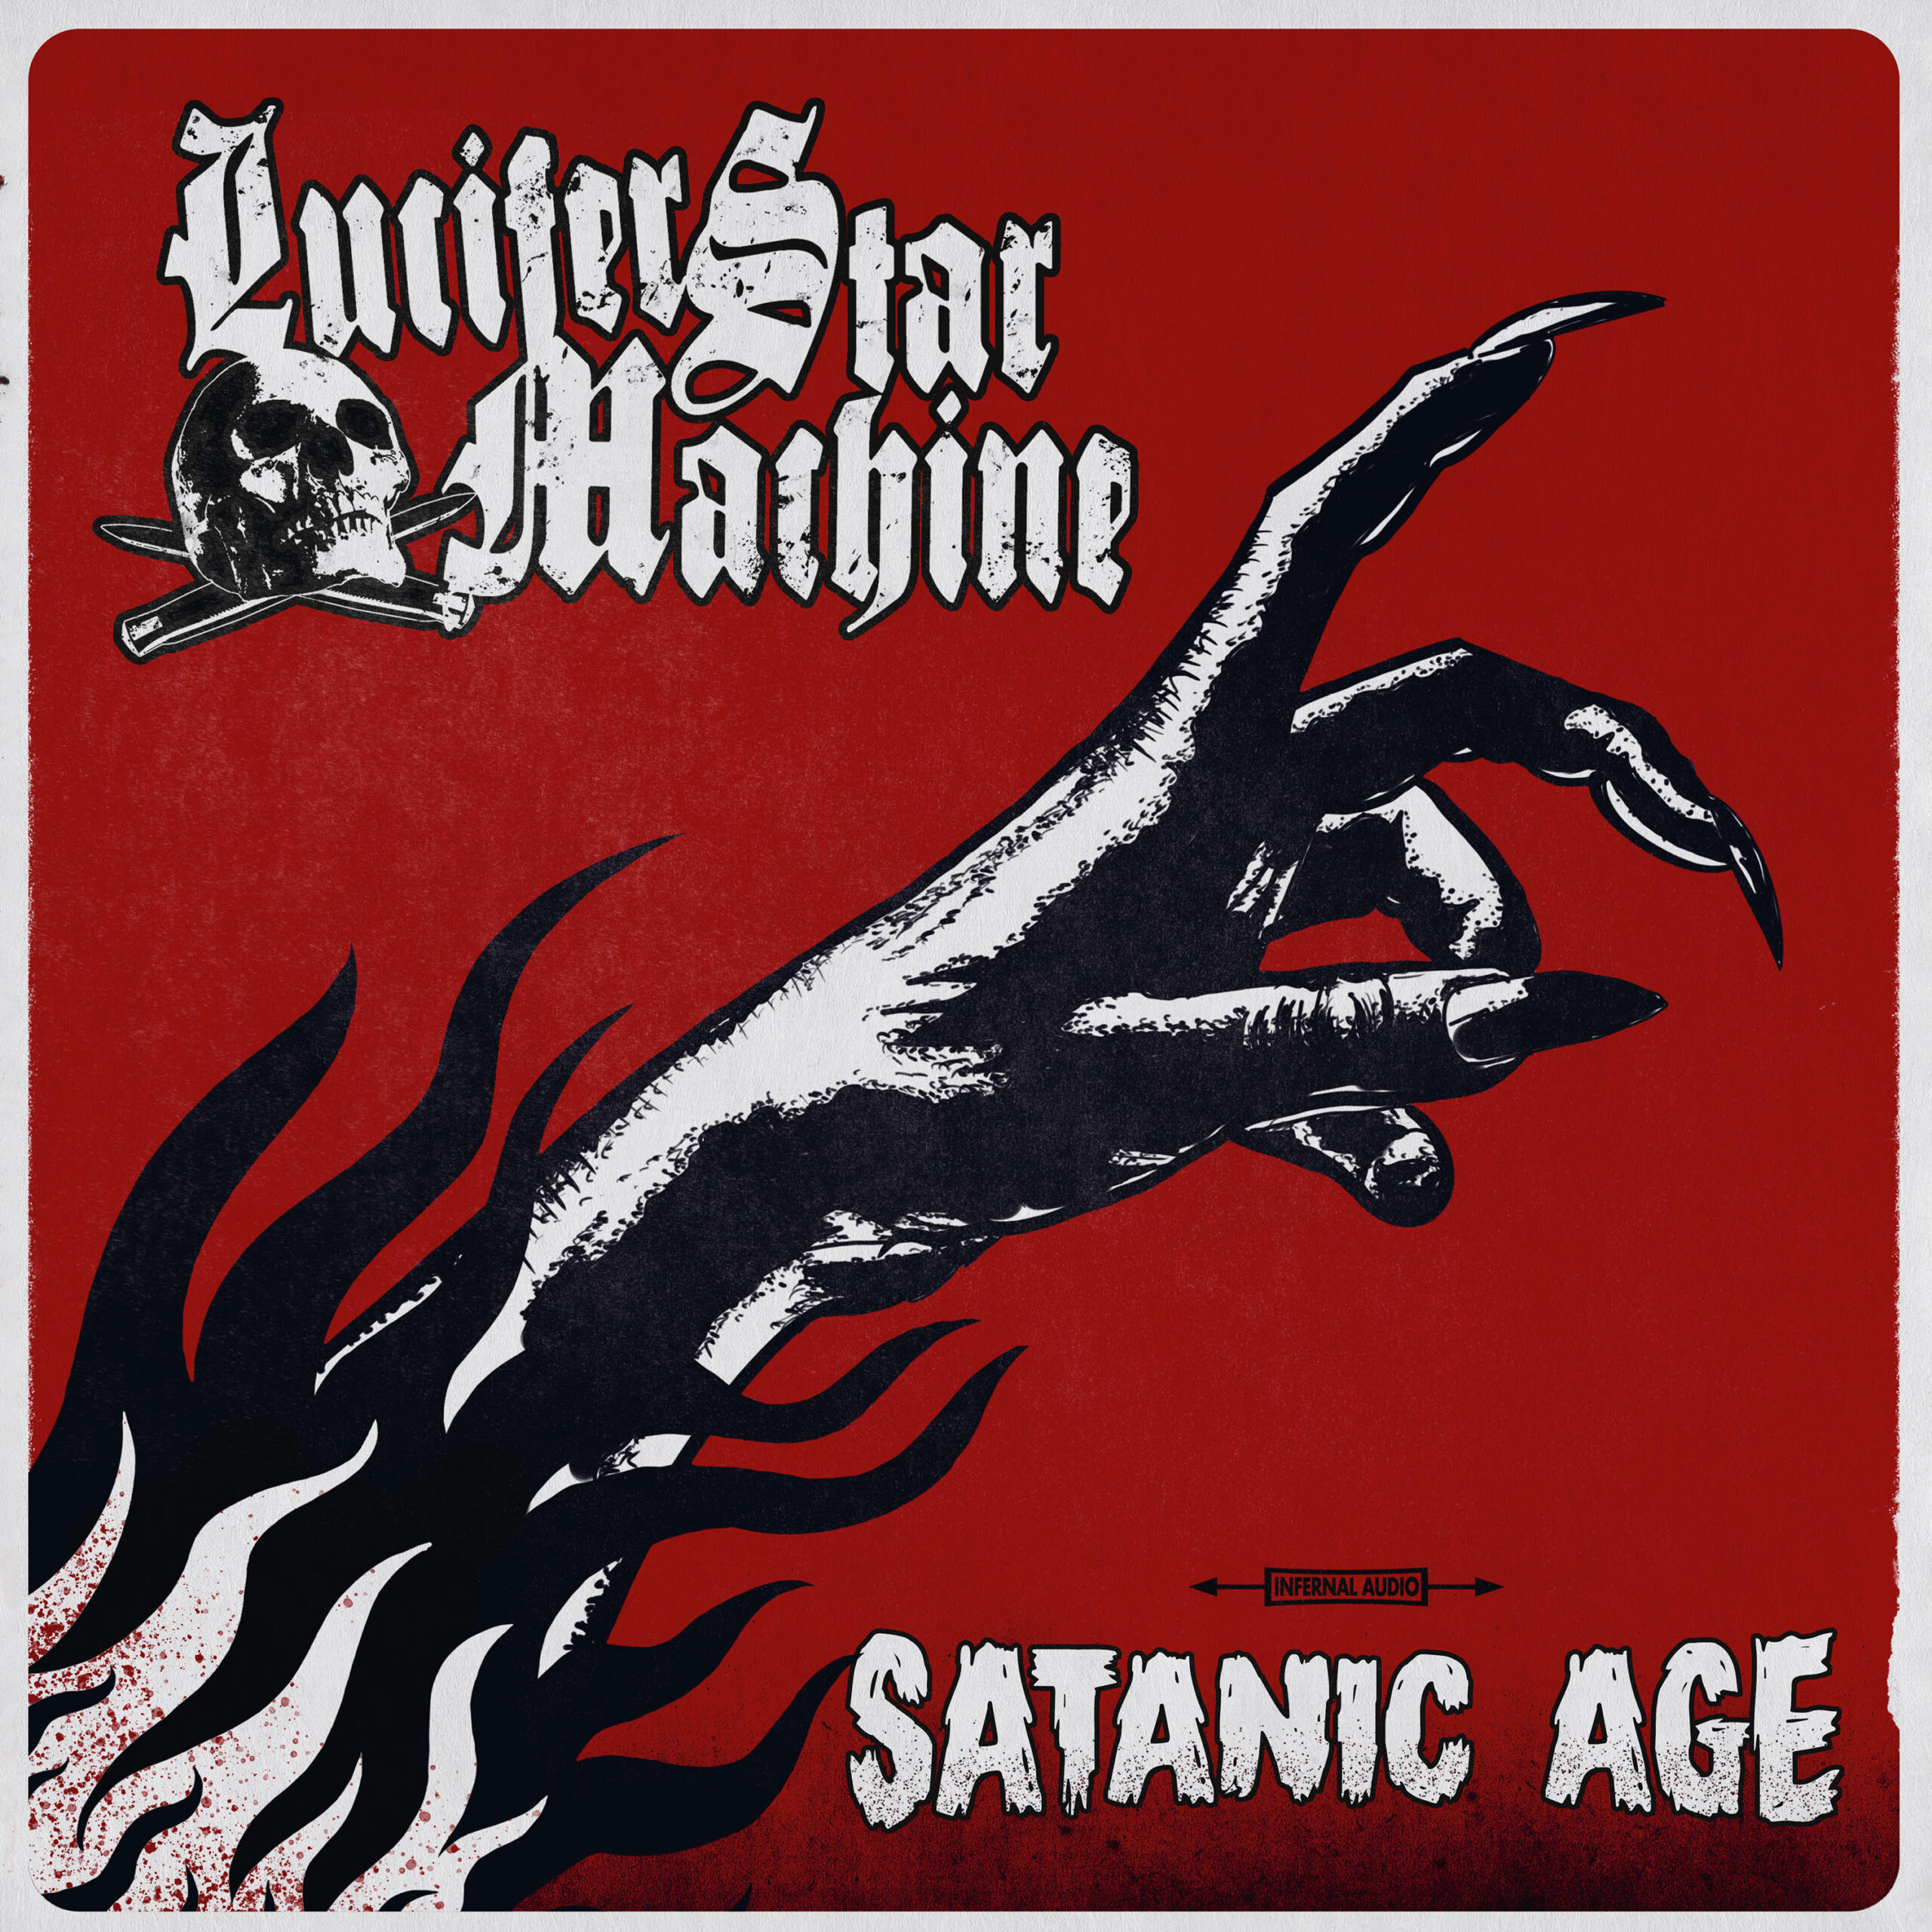 REVIEW: Satanic Age by Lucifer Star Machine